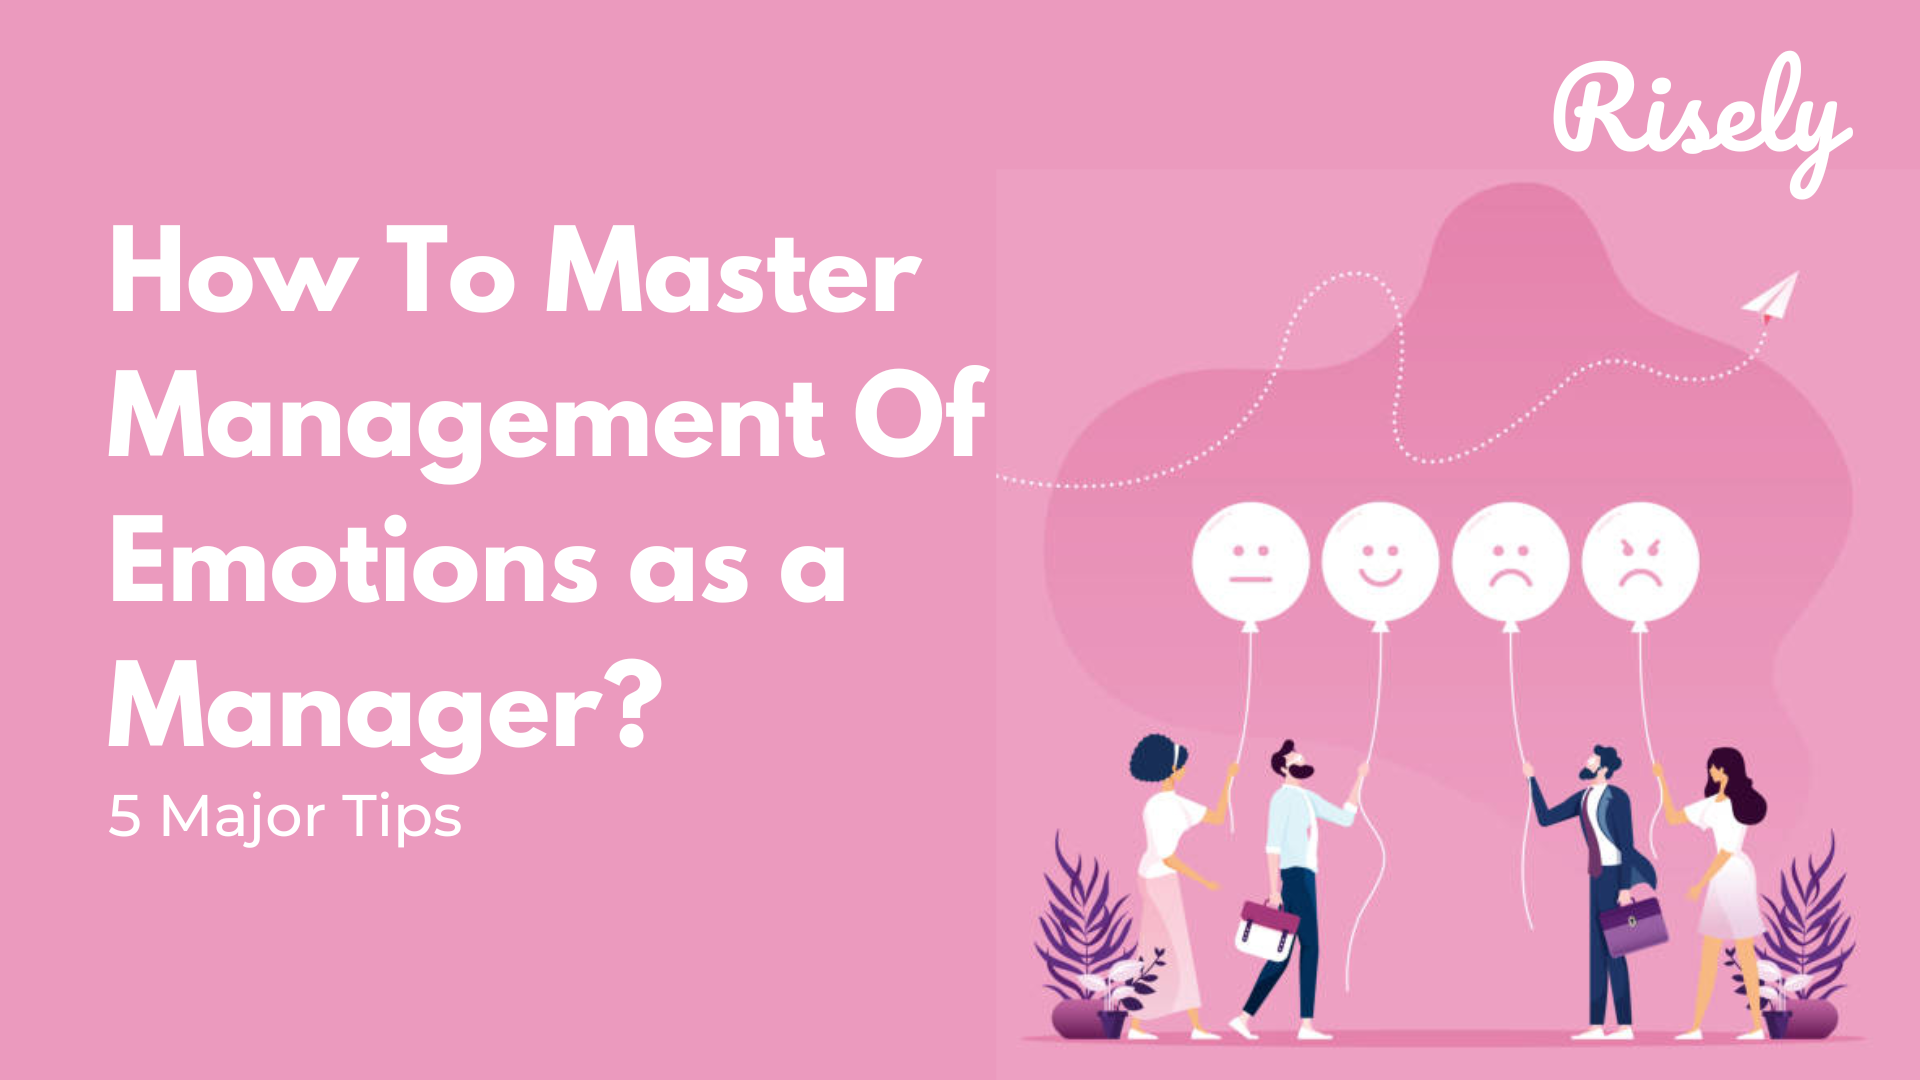 How To Master Management Of Emotions as a Manager? The Ultimate Guide